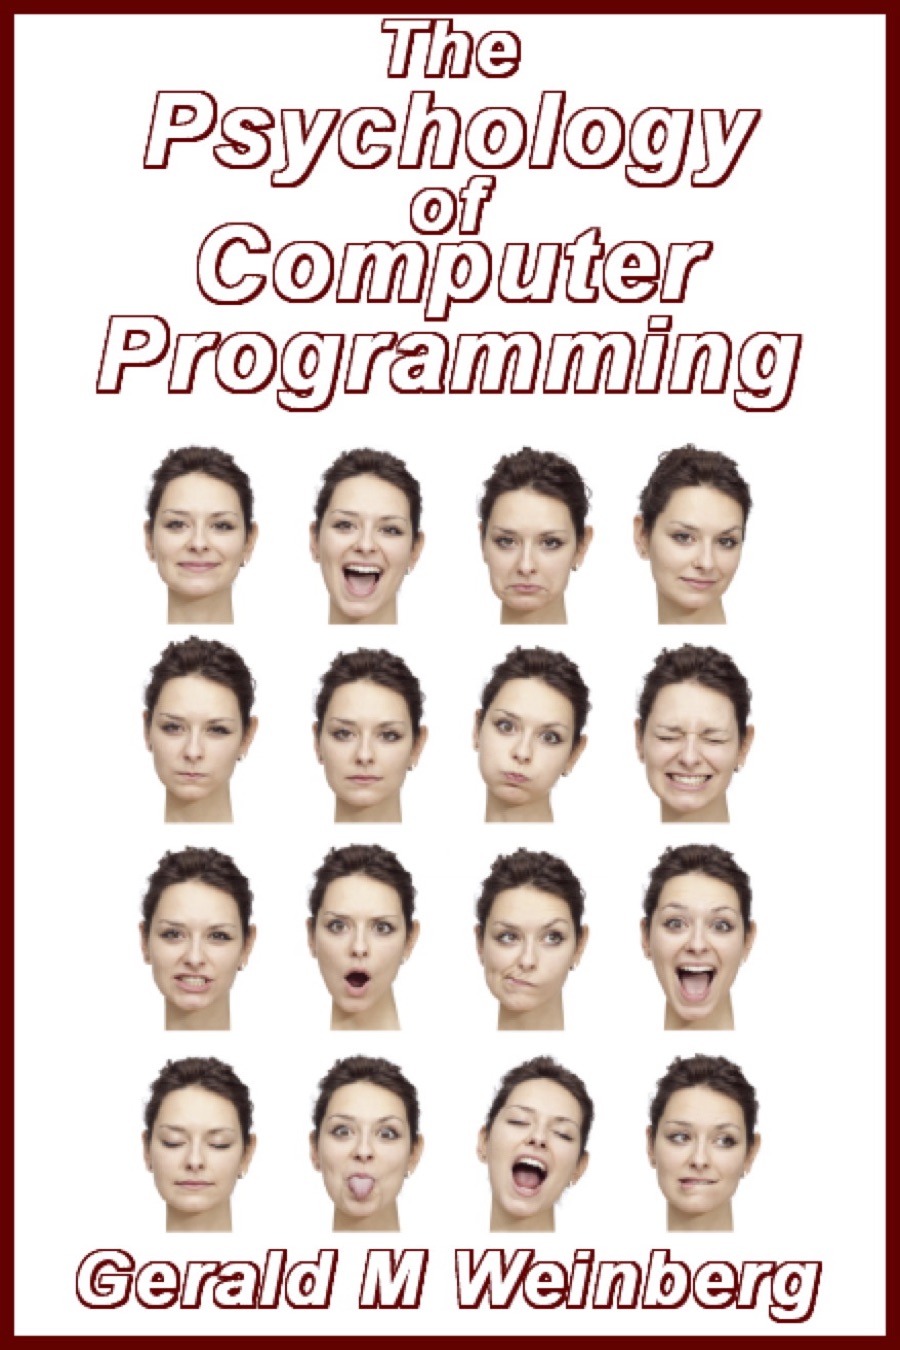 The Psychology of Computer Programming book cover